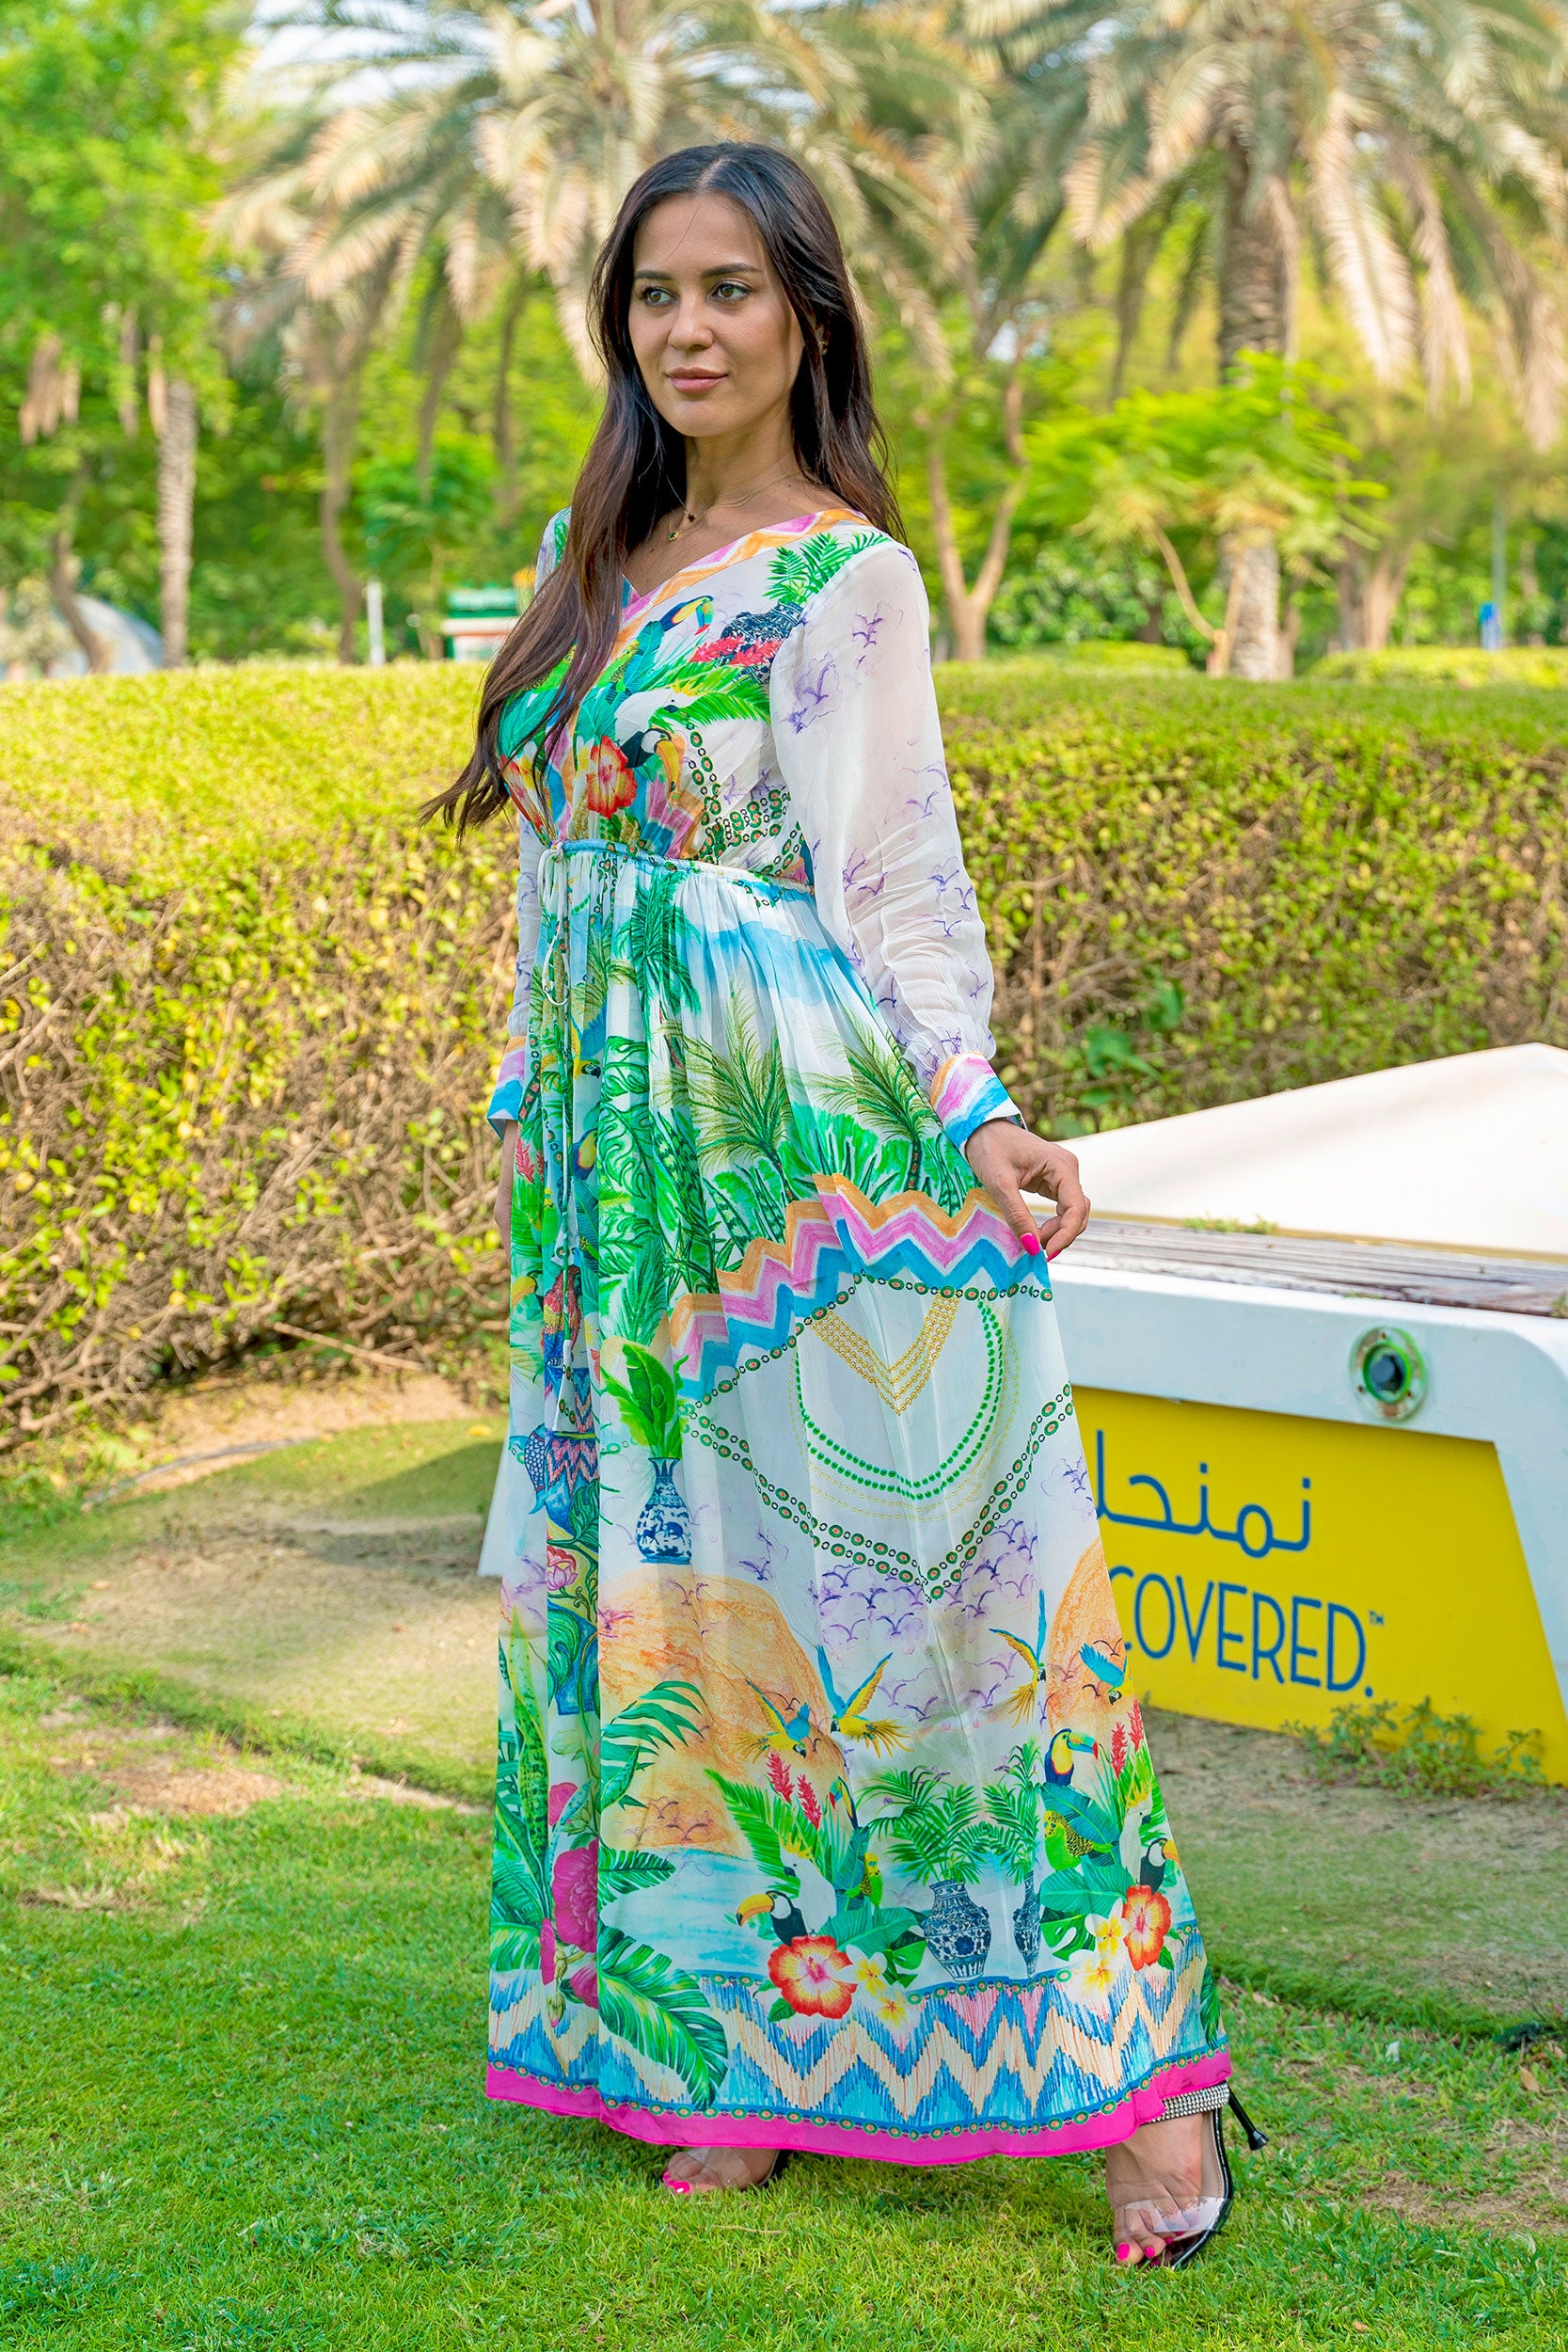 Cool Breeze Summer Print Maxi Dress with Long Sleeves